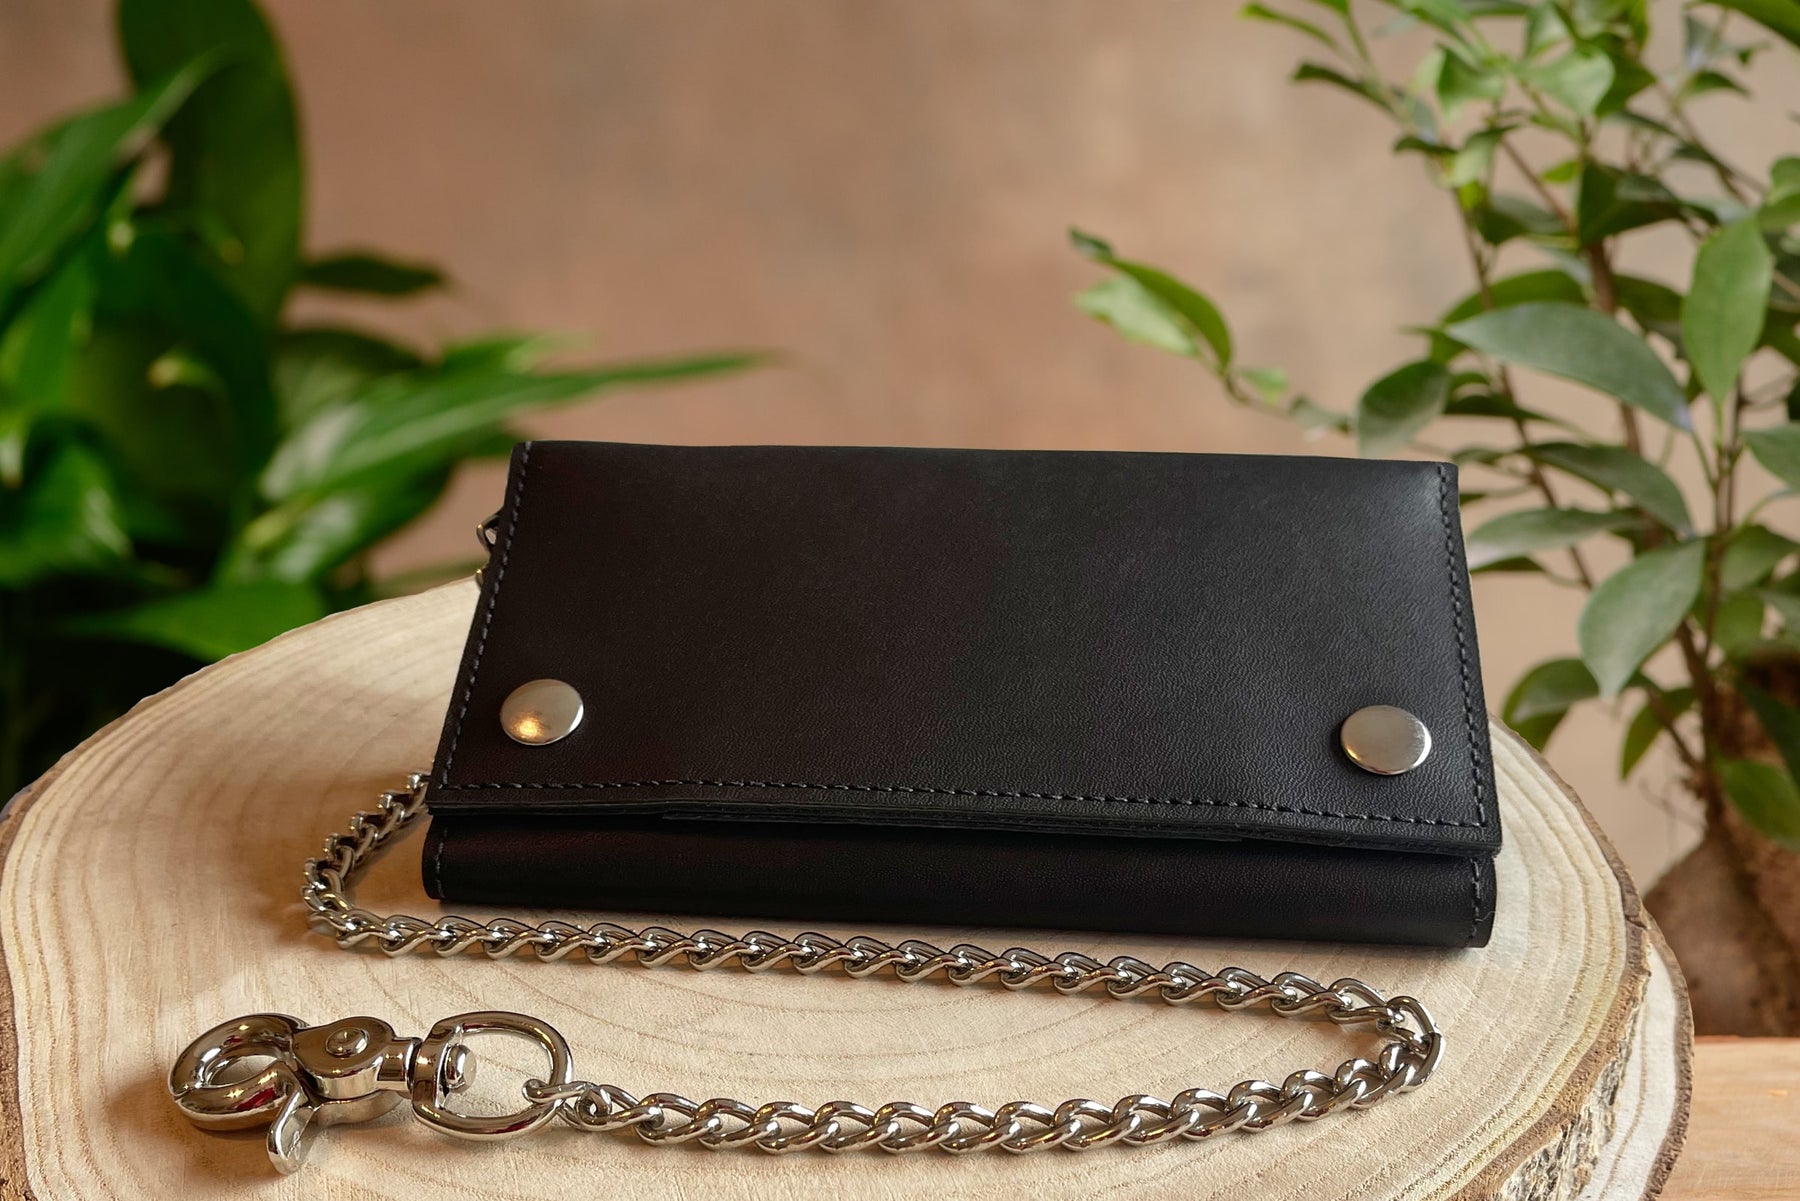 Long Biker Exotic Leather Wallet with Chain - Genuine Elephant Leather,  Black, Brown Interior, Brown Stitching